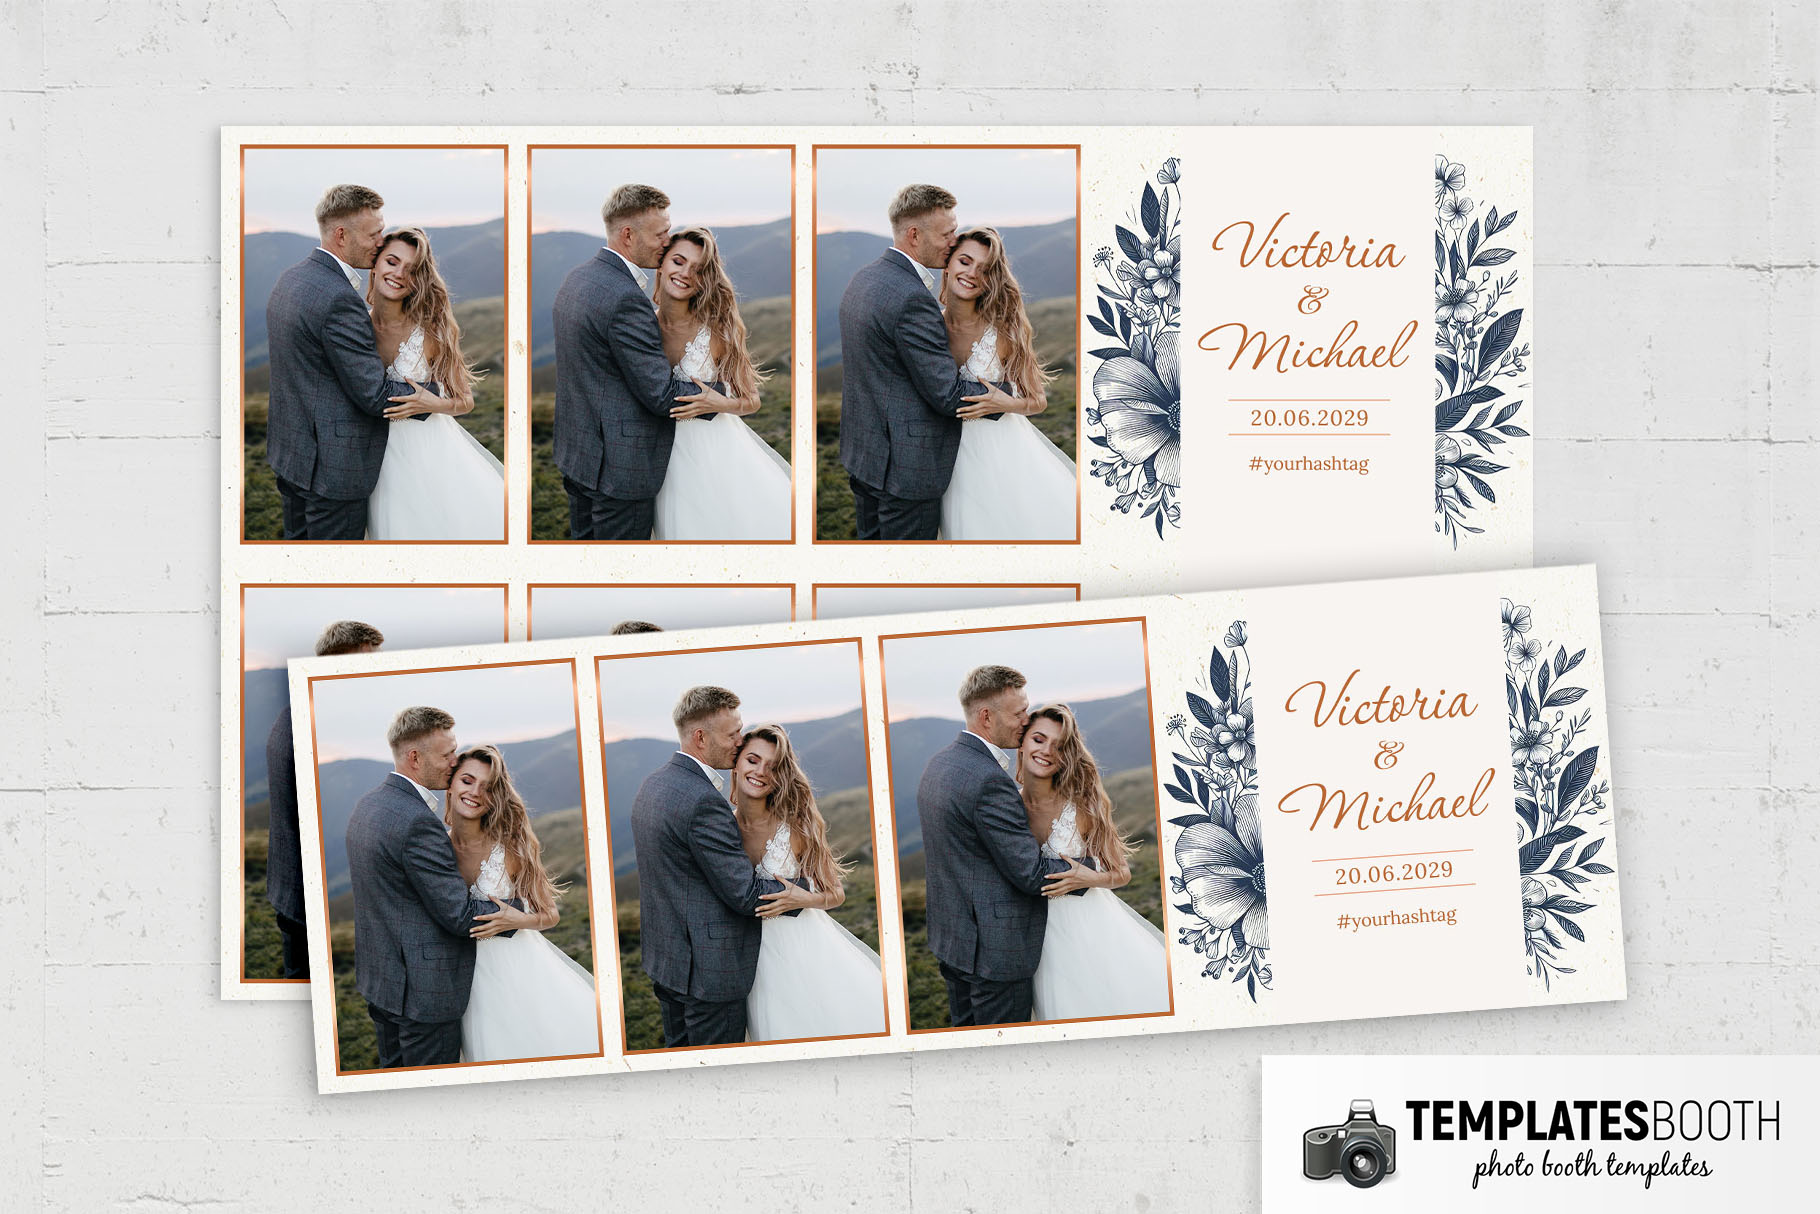 Bronze & Blue Photo Booth Template